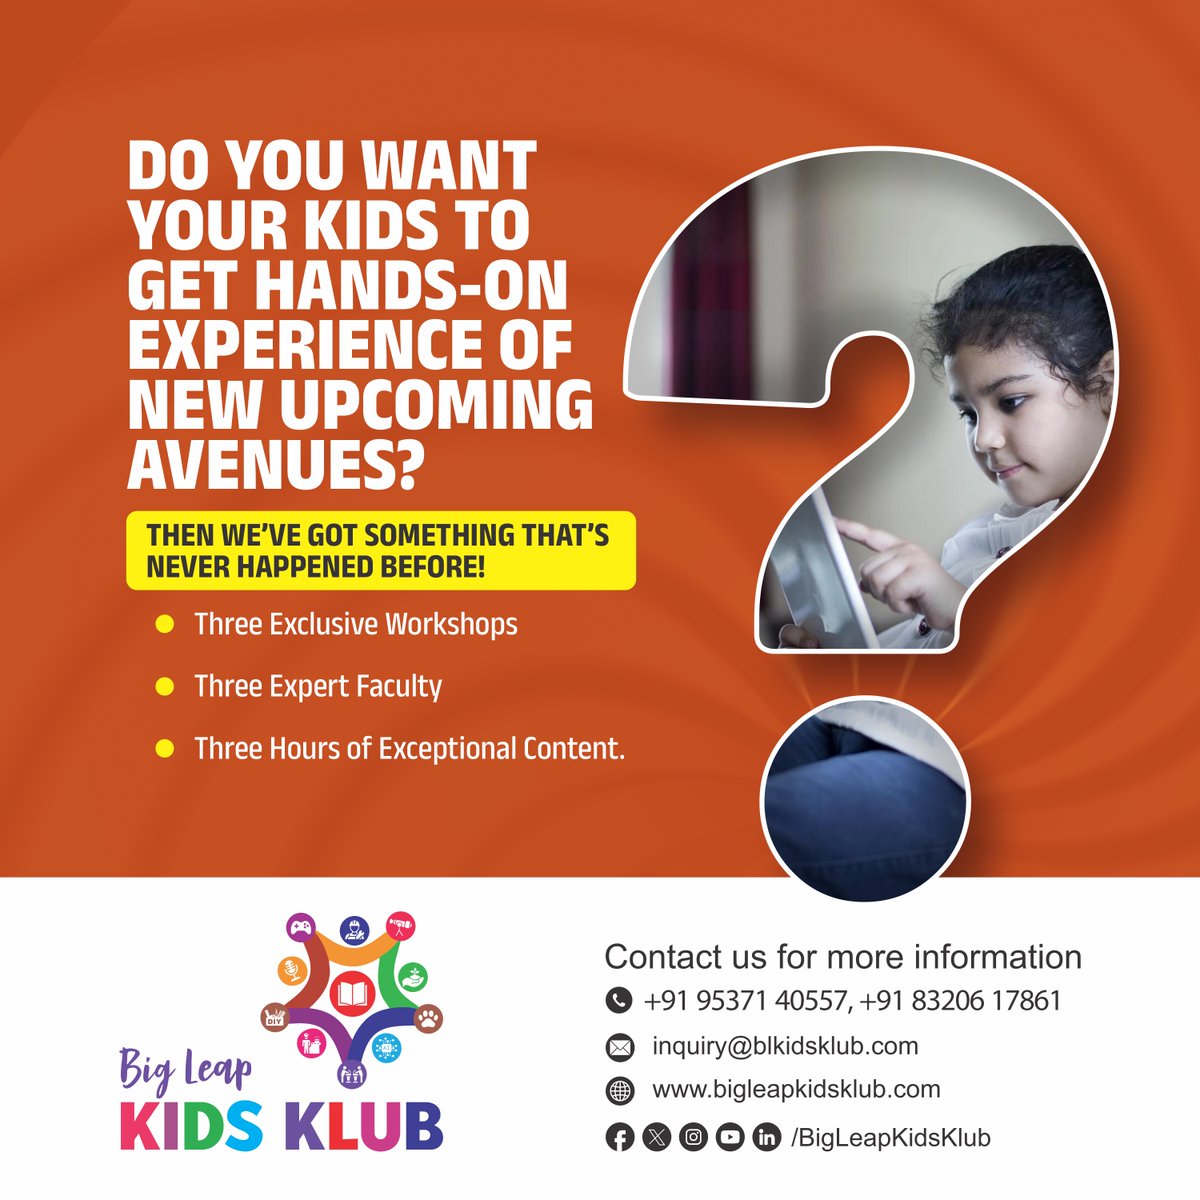 Looking for workshops that enrich your child and expose them to newer avenues? Come and enrol your child for Big Leap Kids Klub summer workshops!
.
#BigLeapKidsKlub #kids #kidsactivities #kids #kidslearning #kidsactivities #kidscrafts #inovation #crafting #learning #intelligent